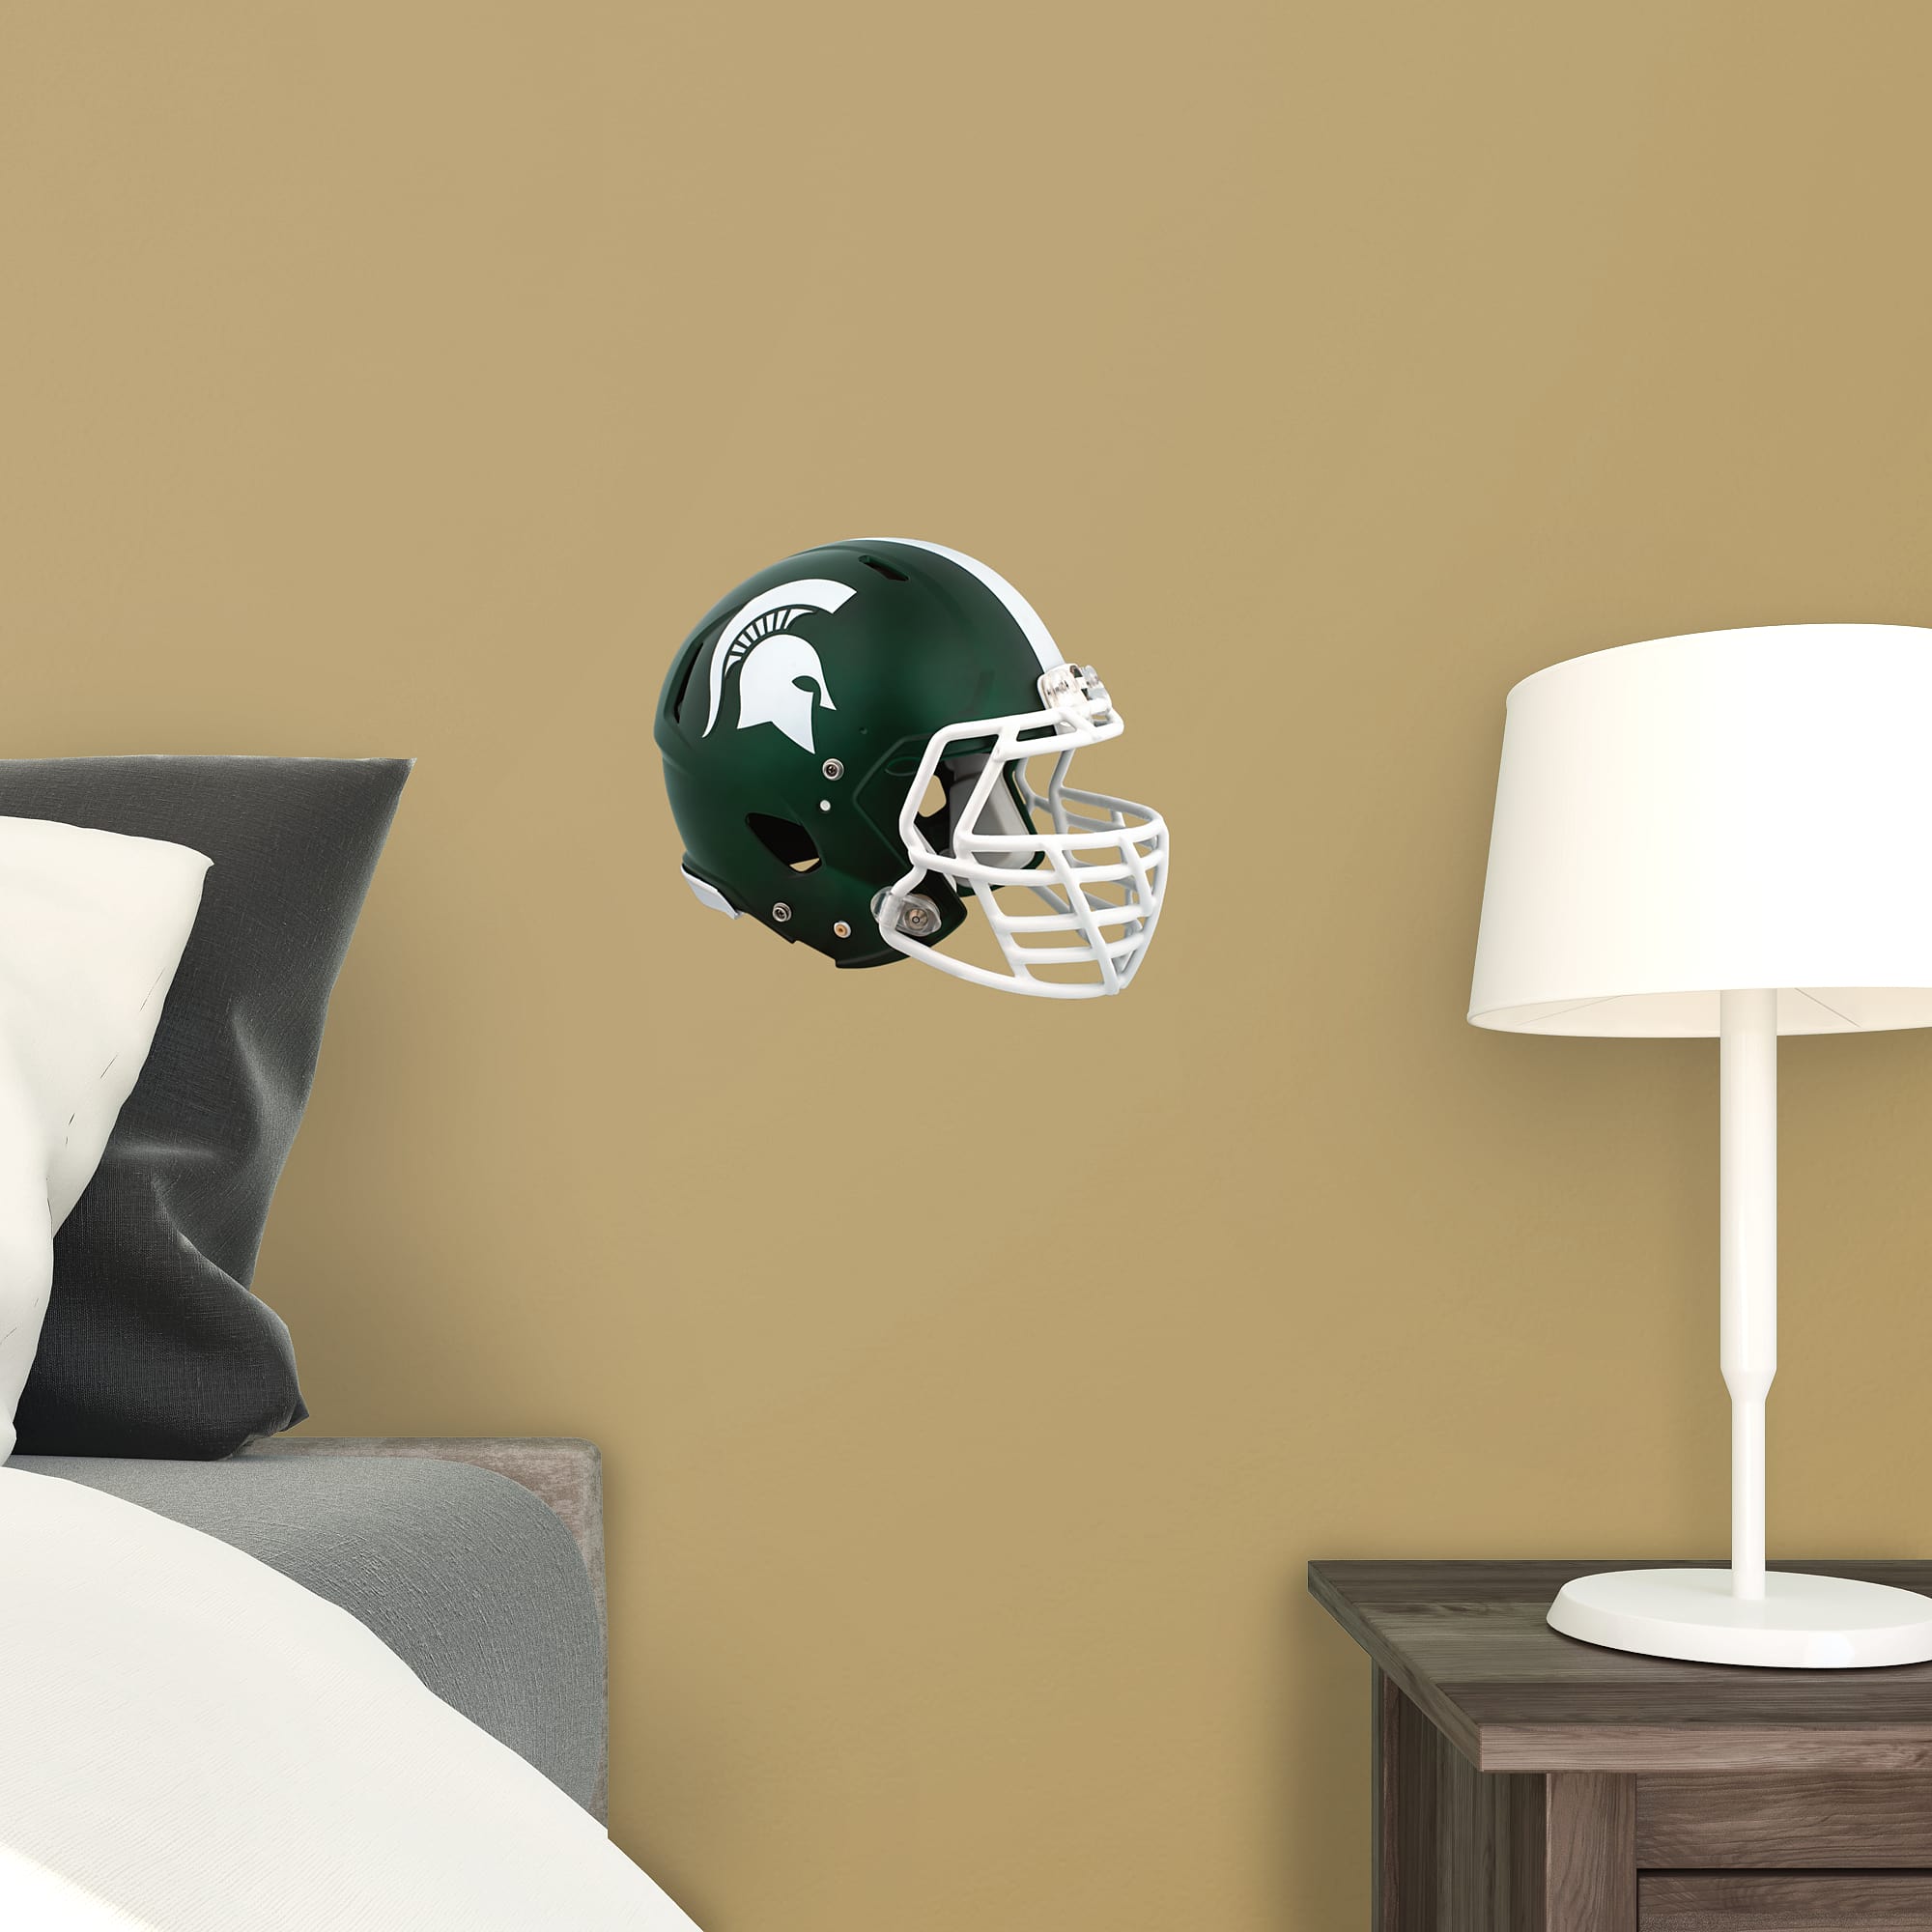 Michigan State Spartans: Helmet - Officially Licensed Removable Wall Decal 12.0"W x 10.0"H by Fathead | Vinyl